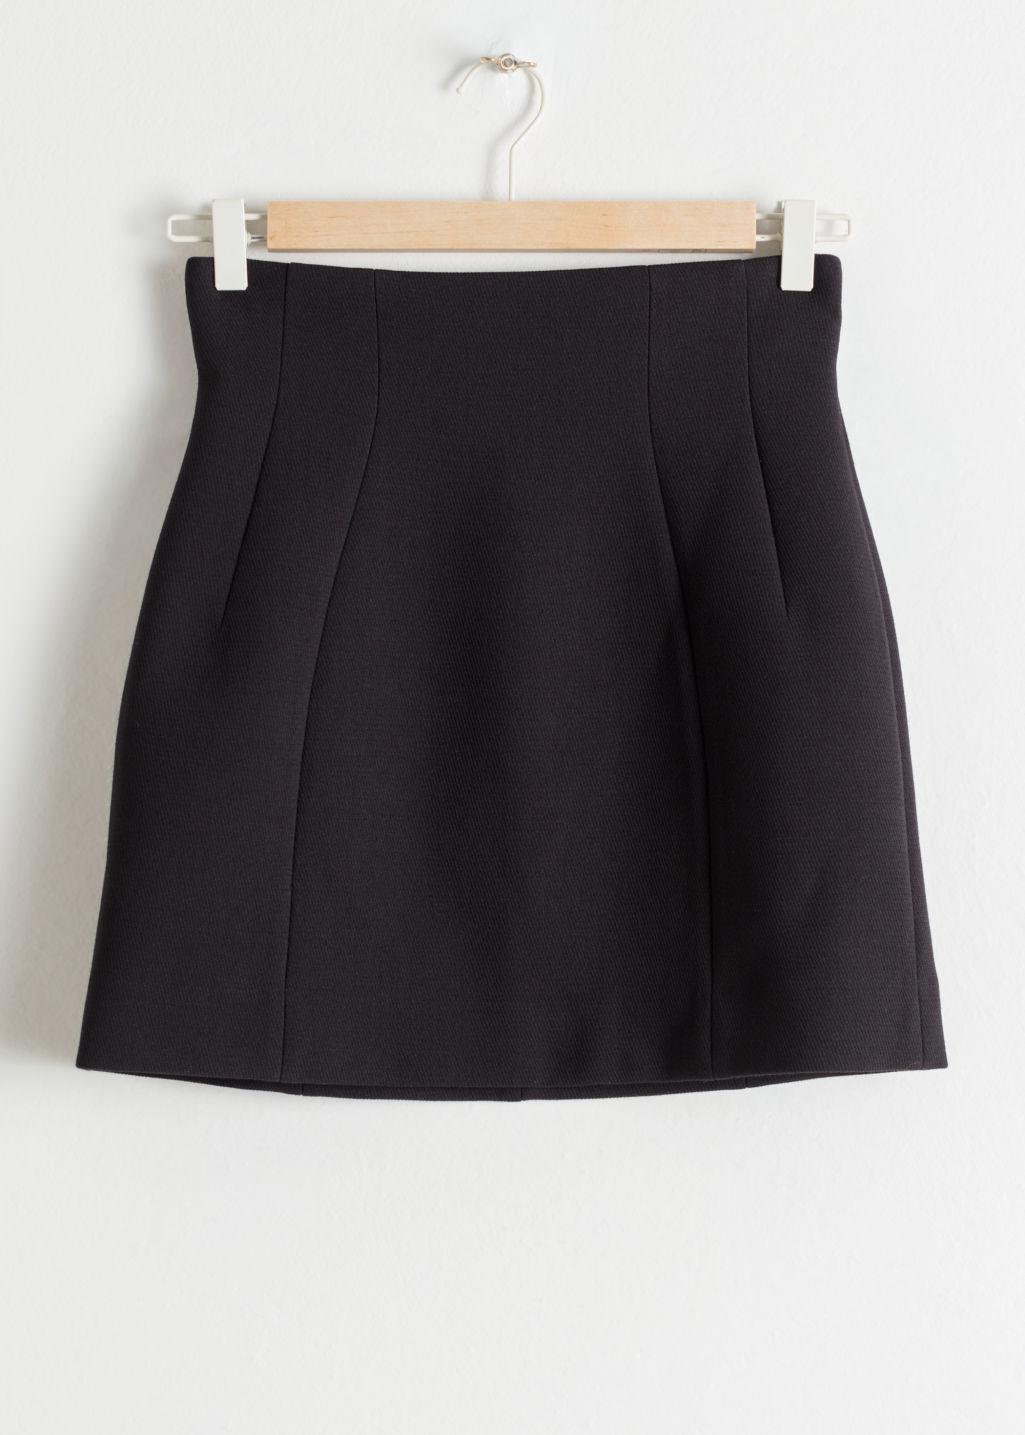 Lyst - & Other Stories Structured High Waisted Mini Skirt in Black